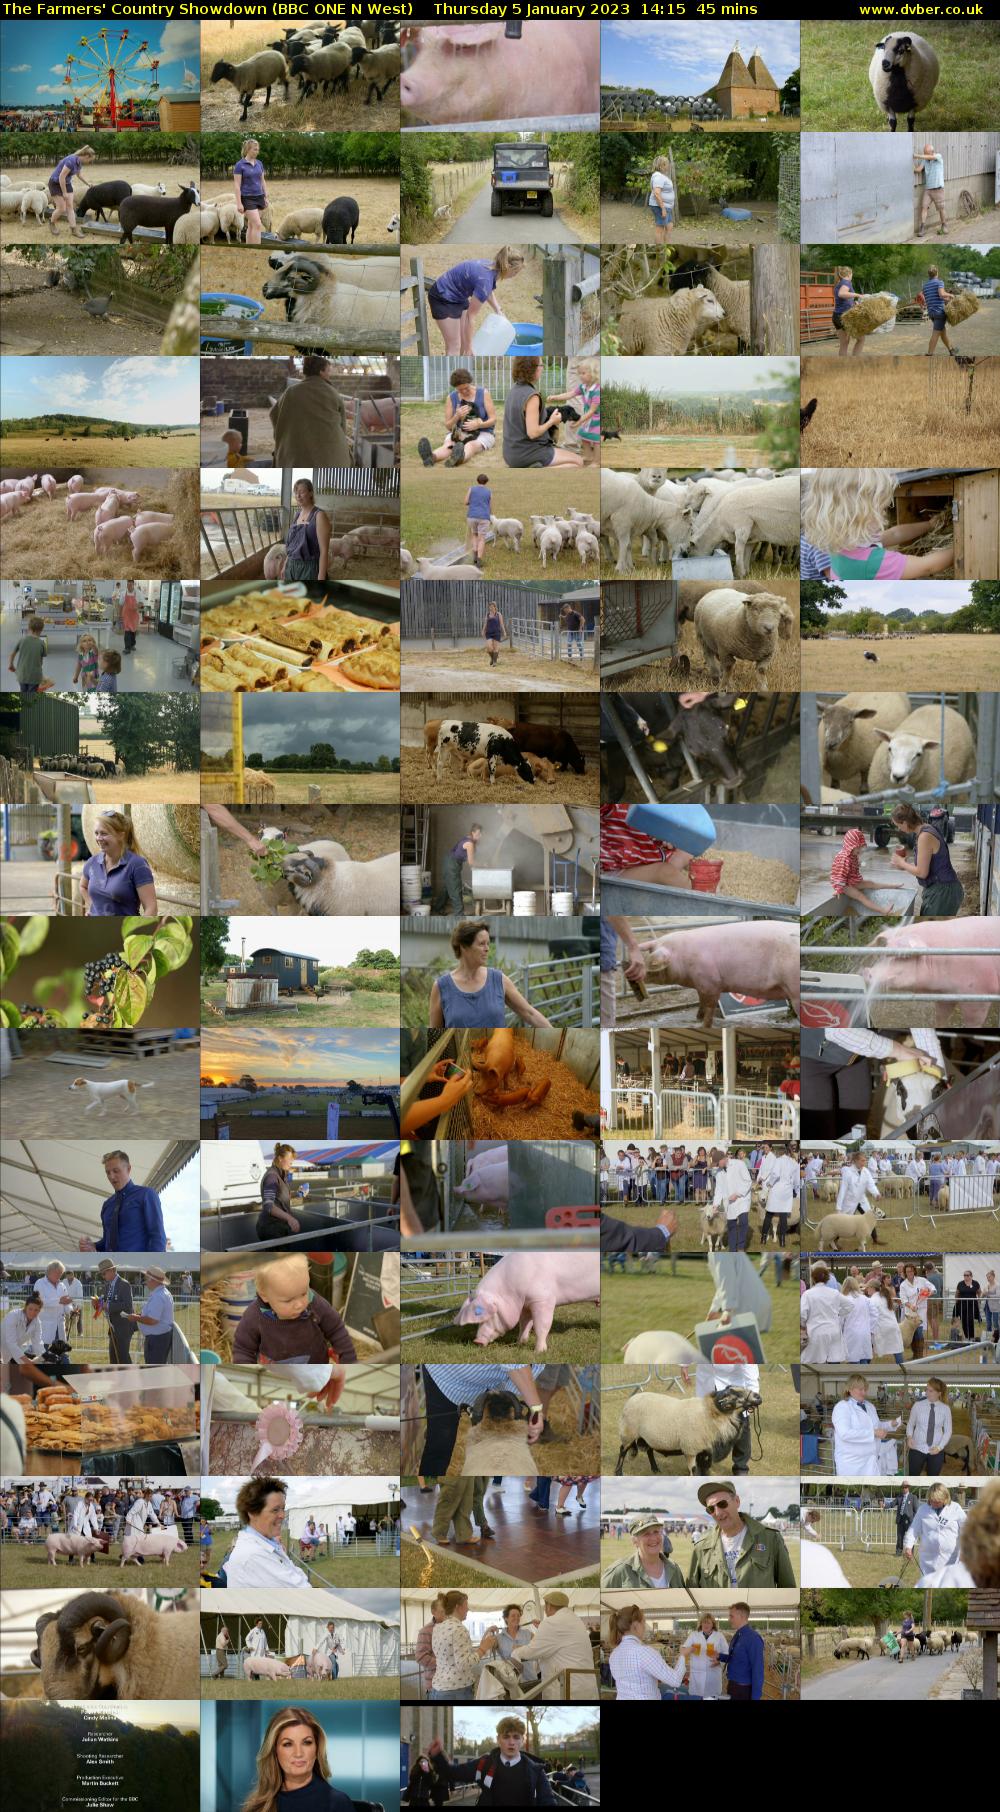 The Farmers' Country Showdown (BBC ONE N West) Thursday 5 January 2023 14:15 - 15:00